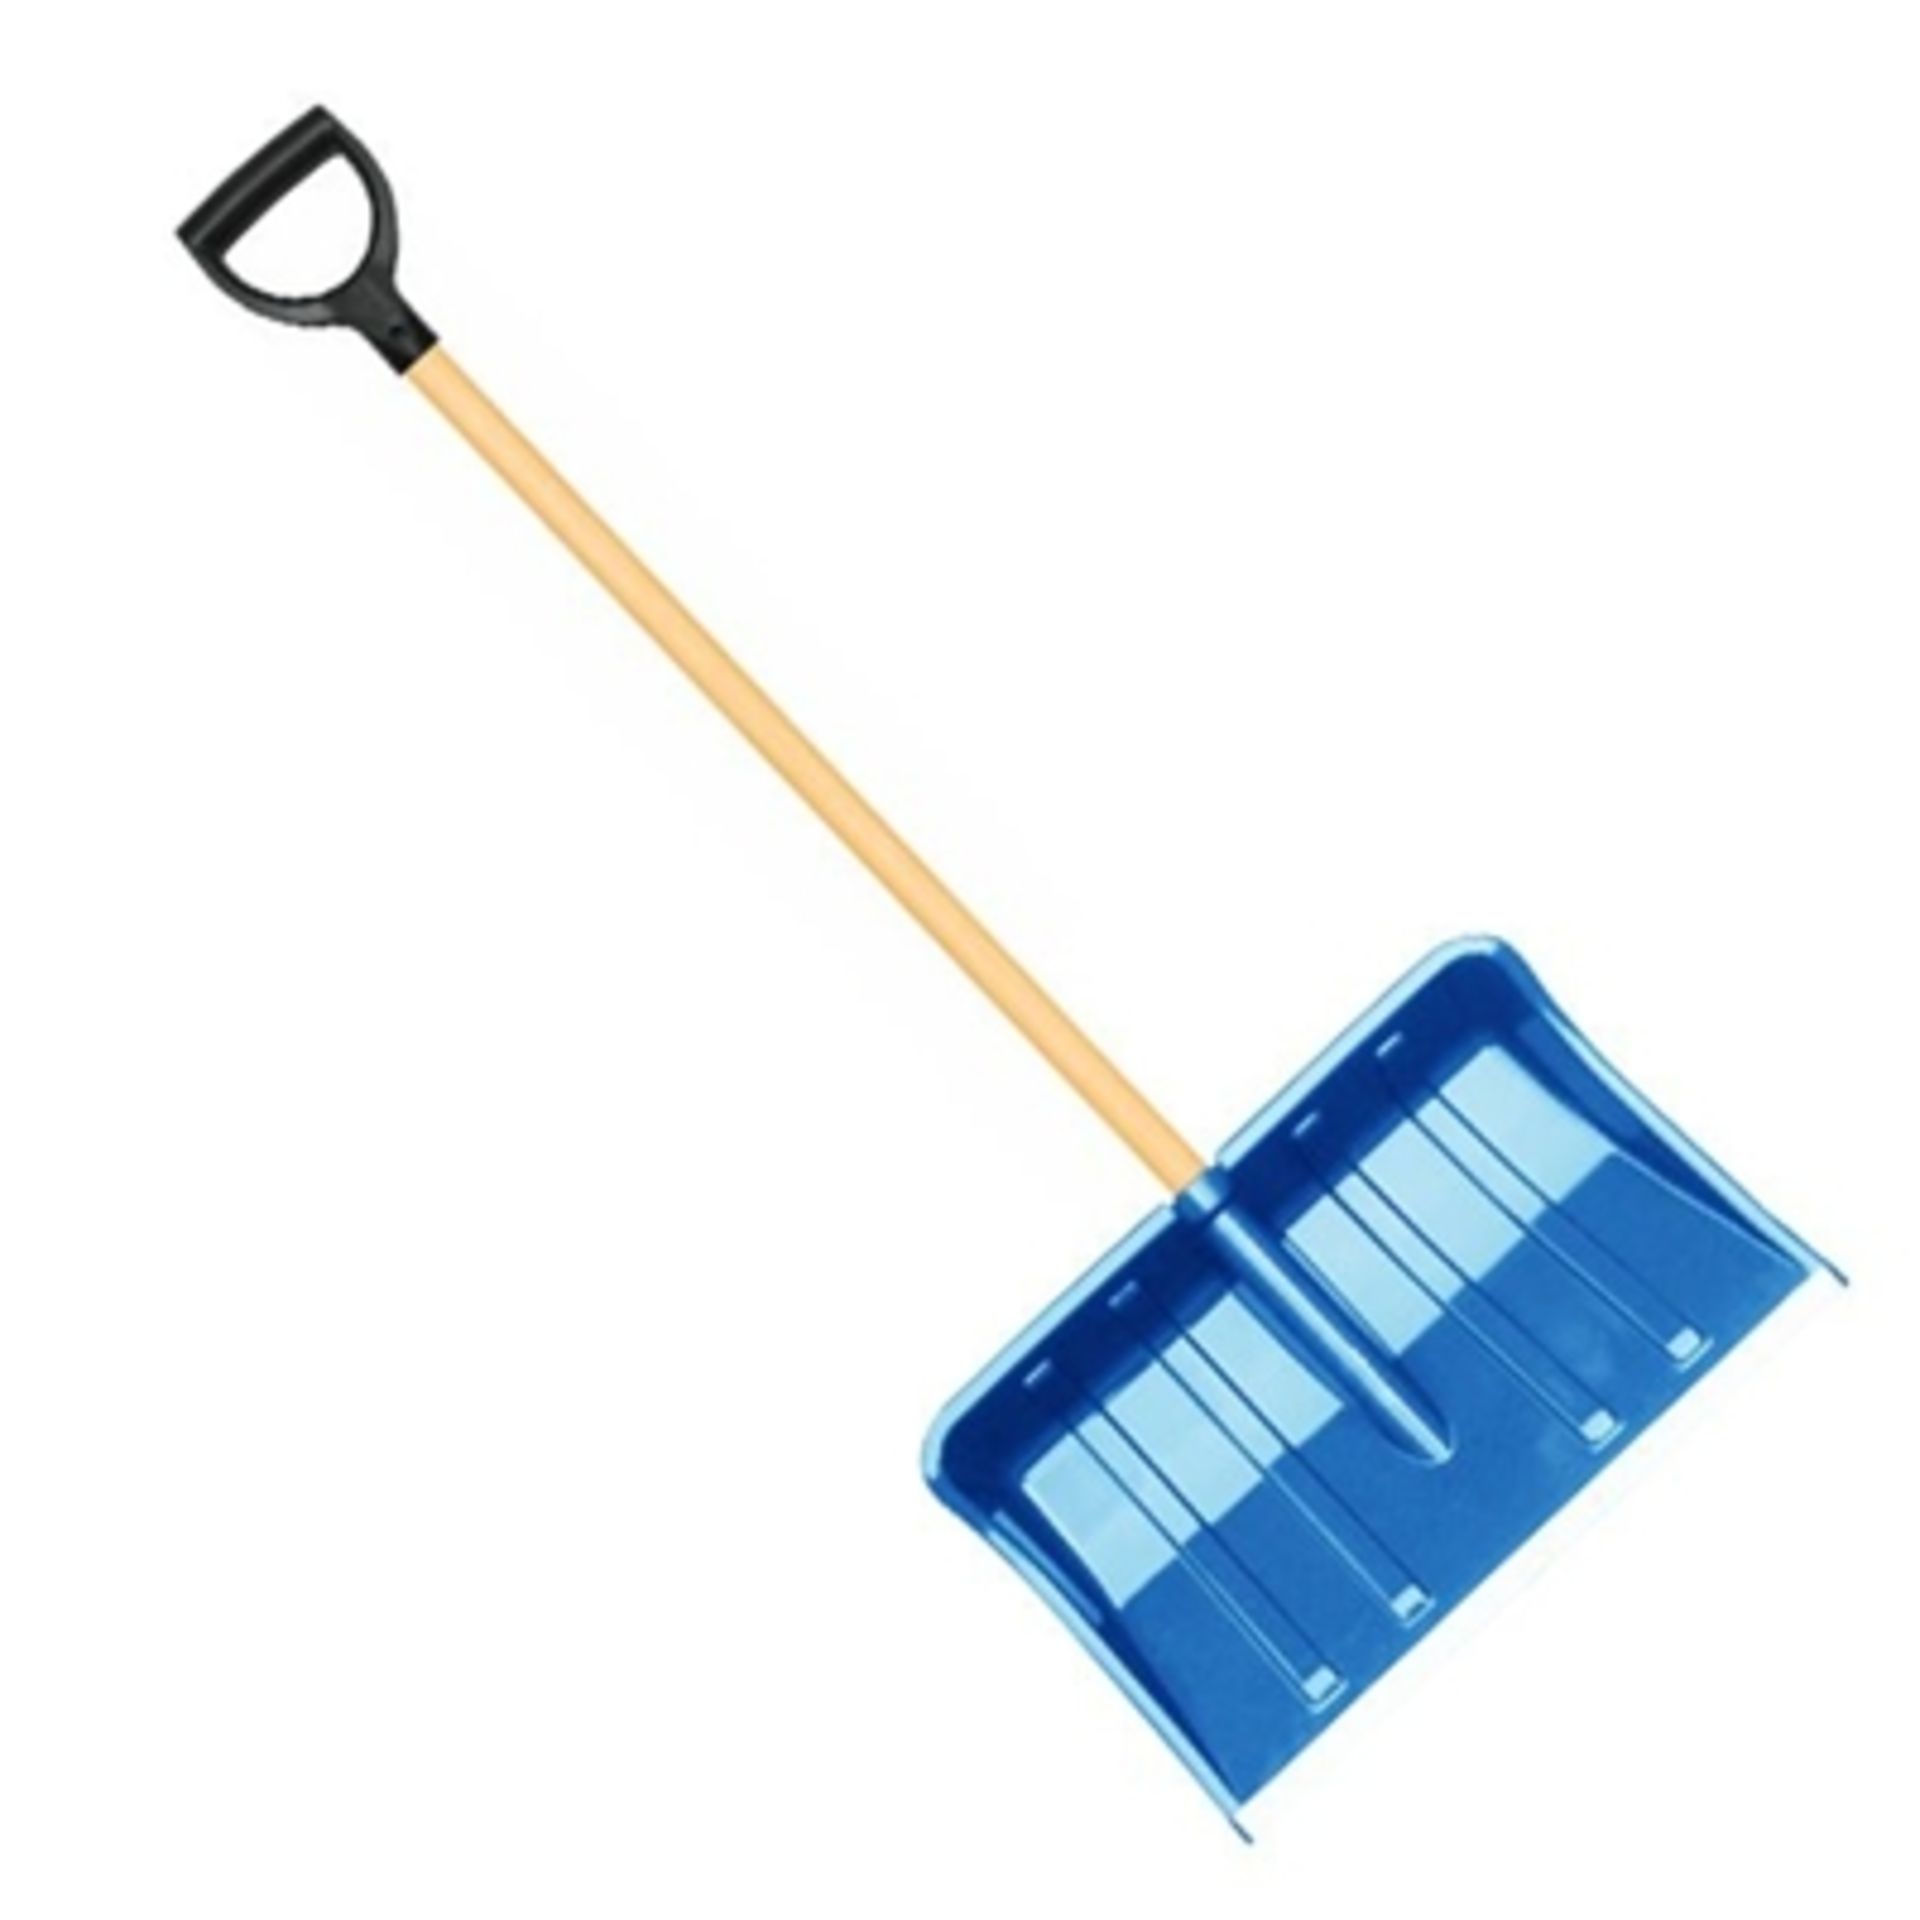 500 x Alpin 2 Wooden Shaft Blue Shovel with Metal Blade - Image 2 of 3